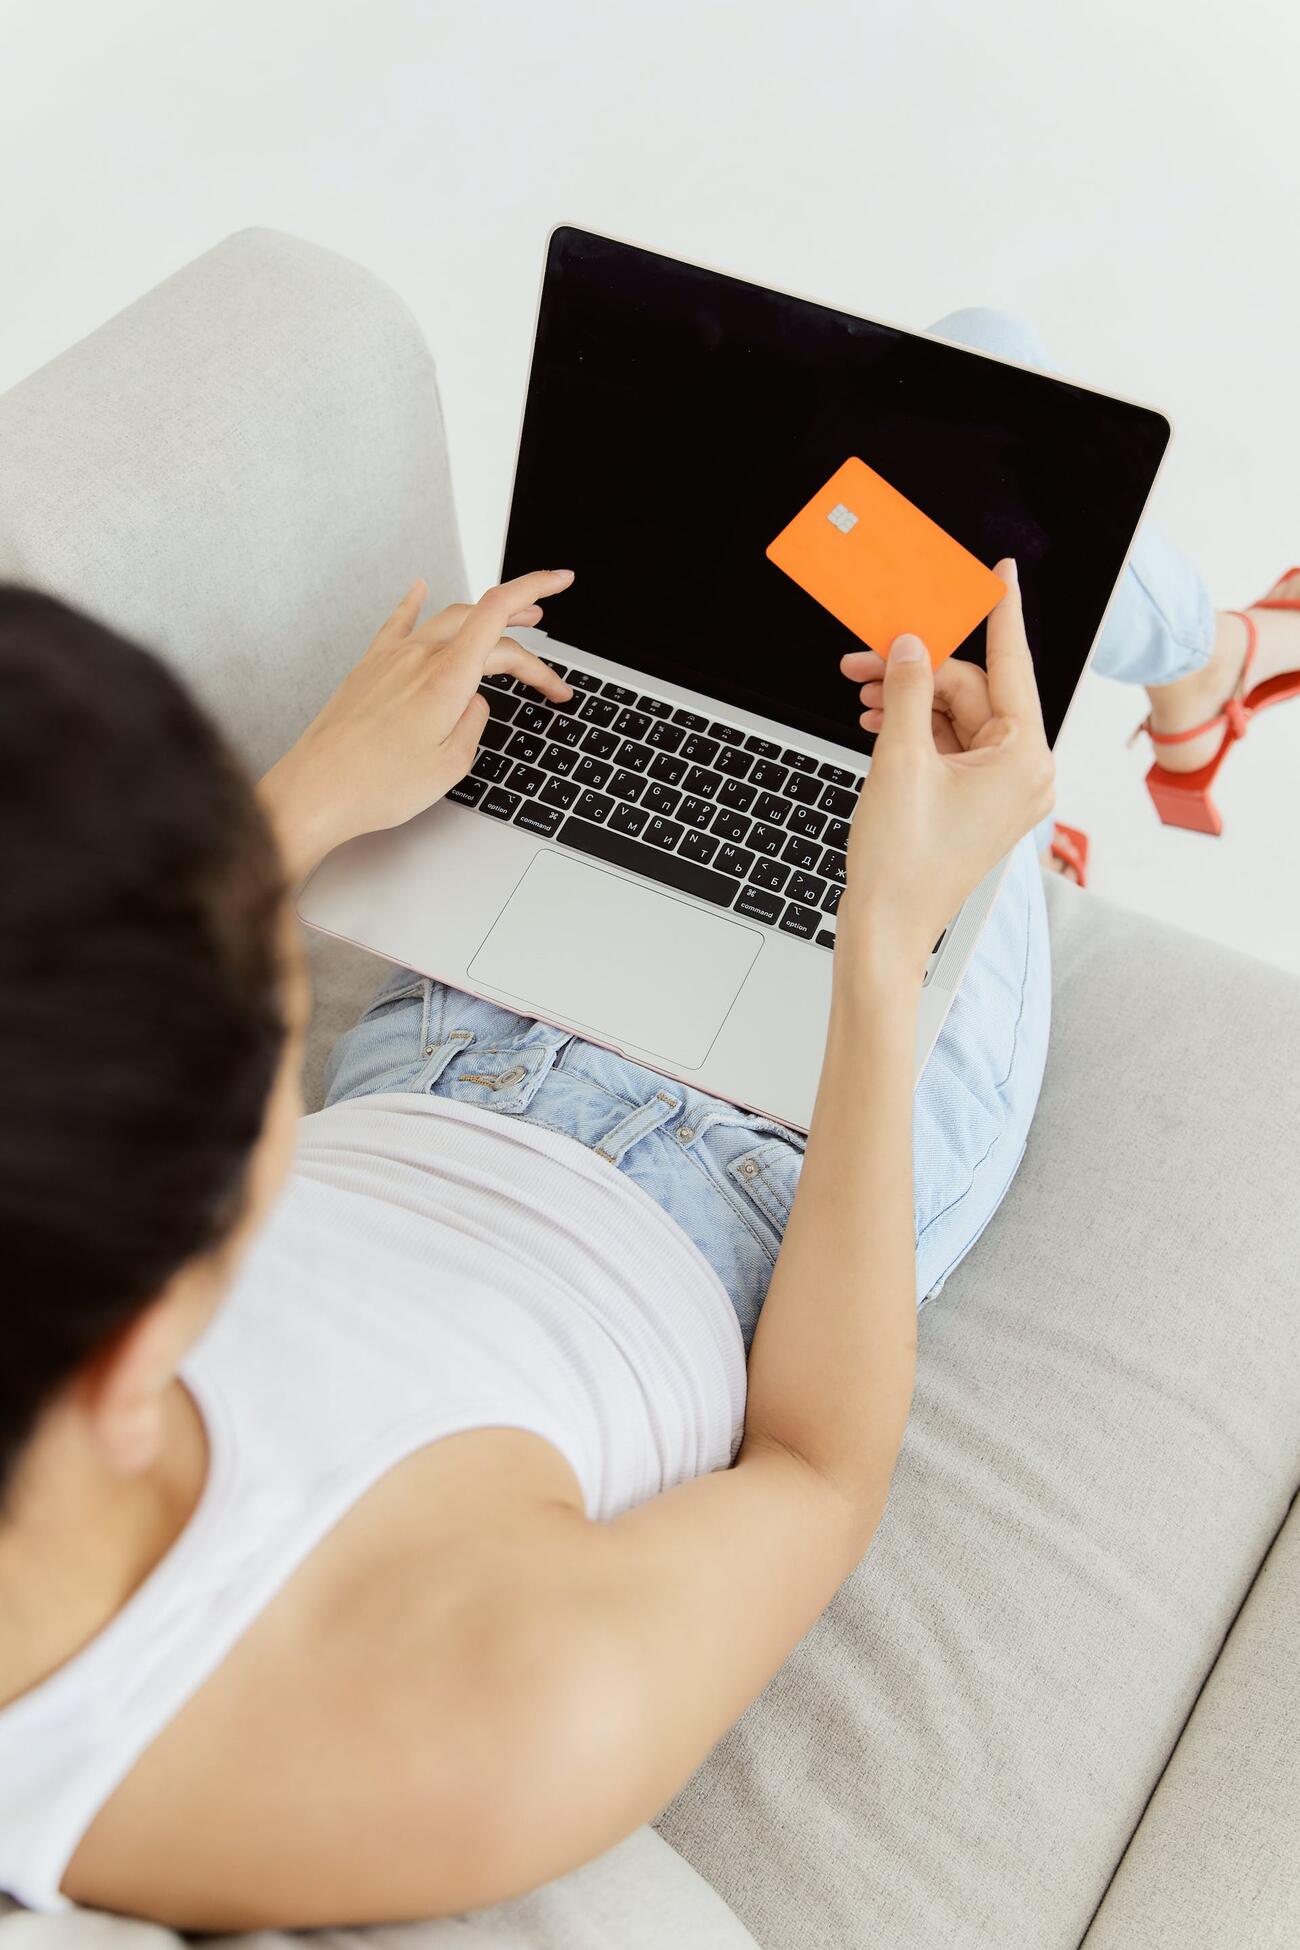 A woman sitting on a couch holding a credit card while typing on the laptop on her lap